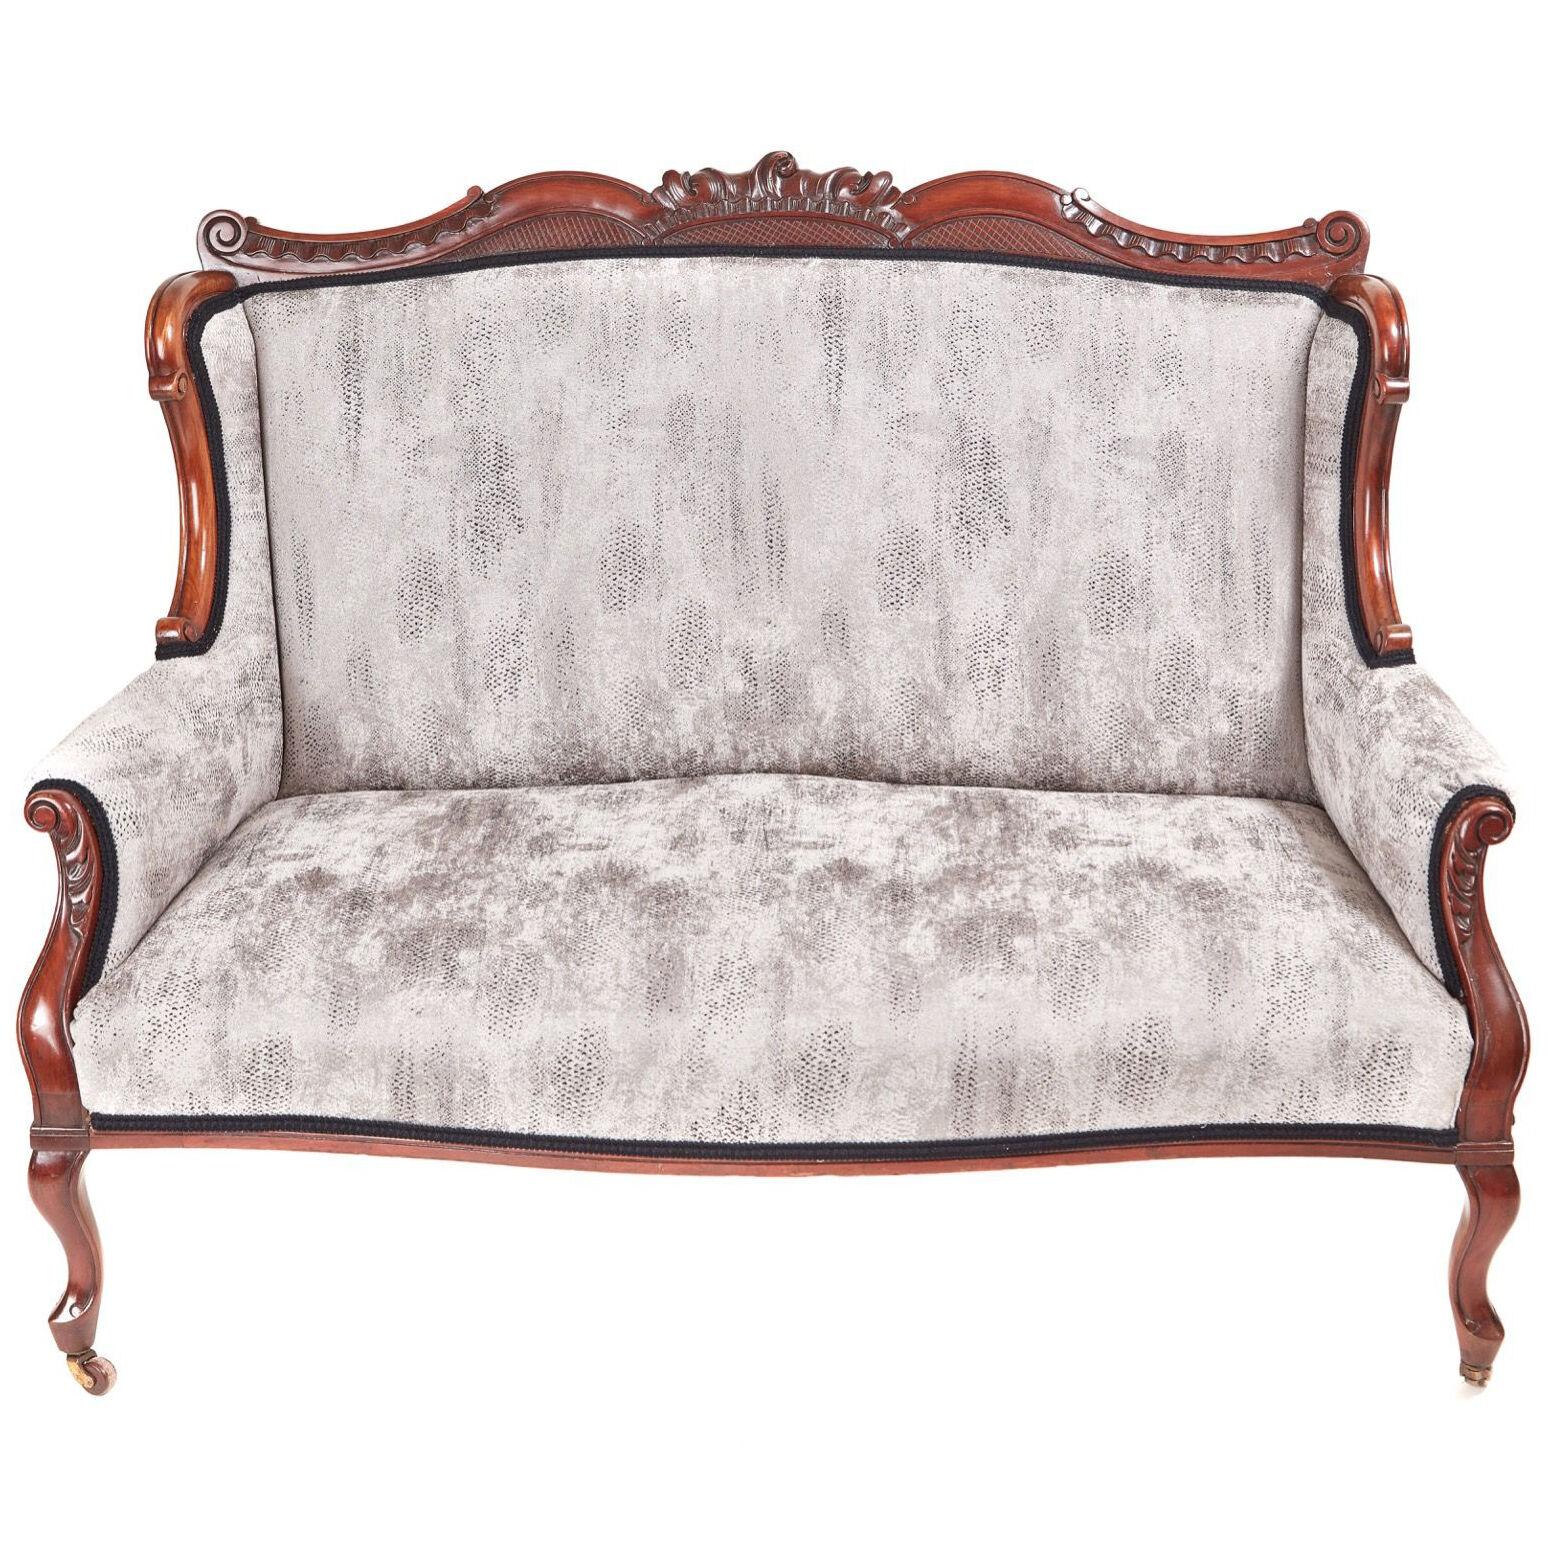 Outstanding Victorian Carved Mahogany Settee